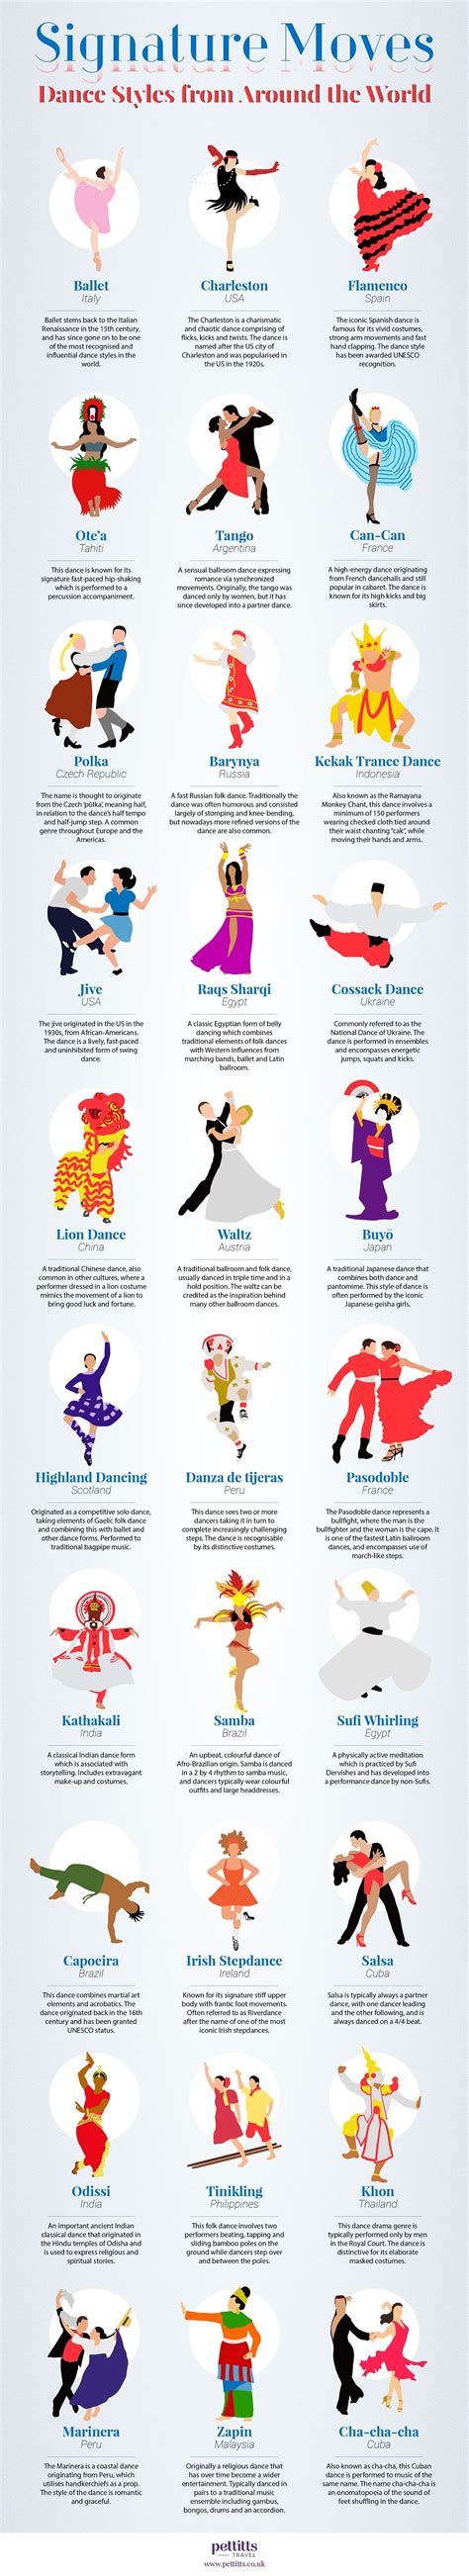 Signature Moves Dance Styles From Around The World Infographic